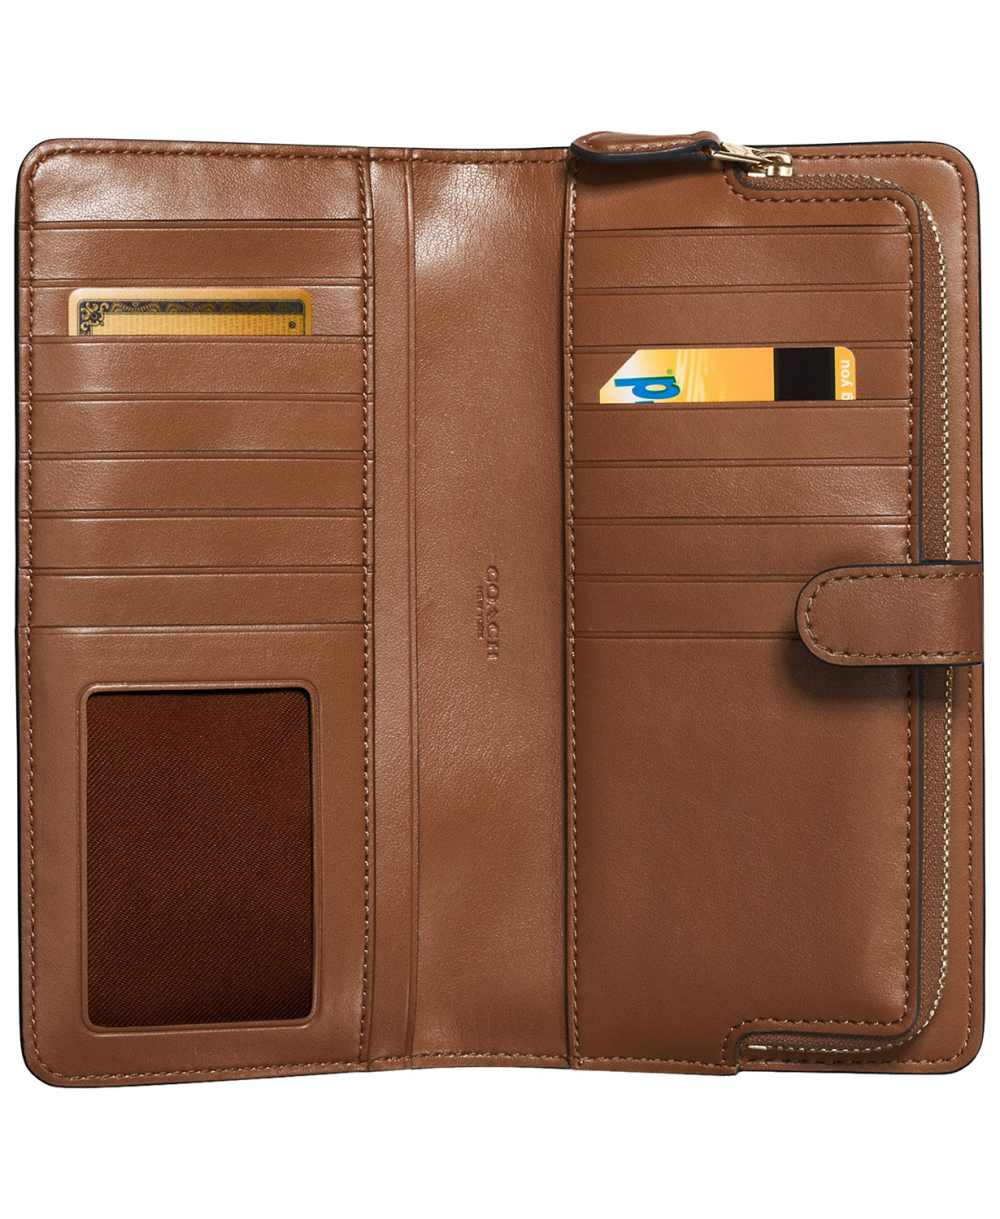 Coach Skinny Wallet in Refined Leather (1941 Saddle/Gold)